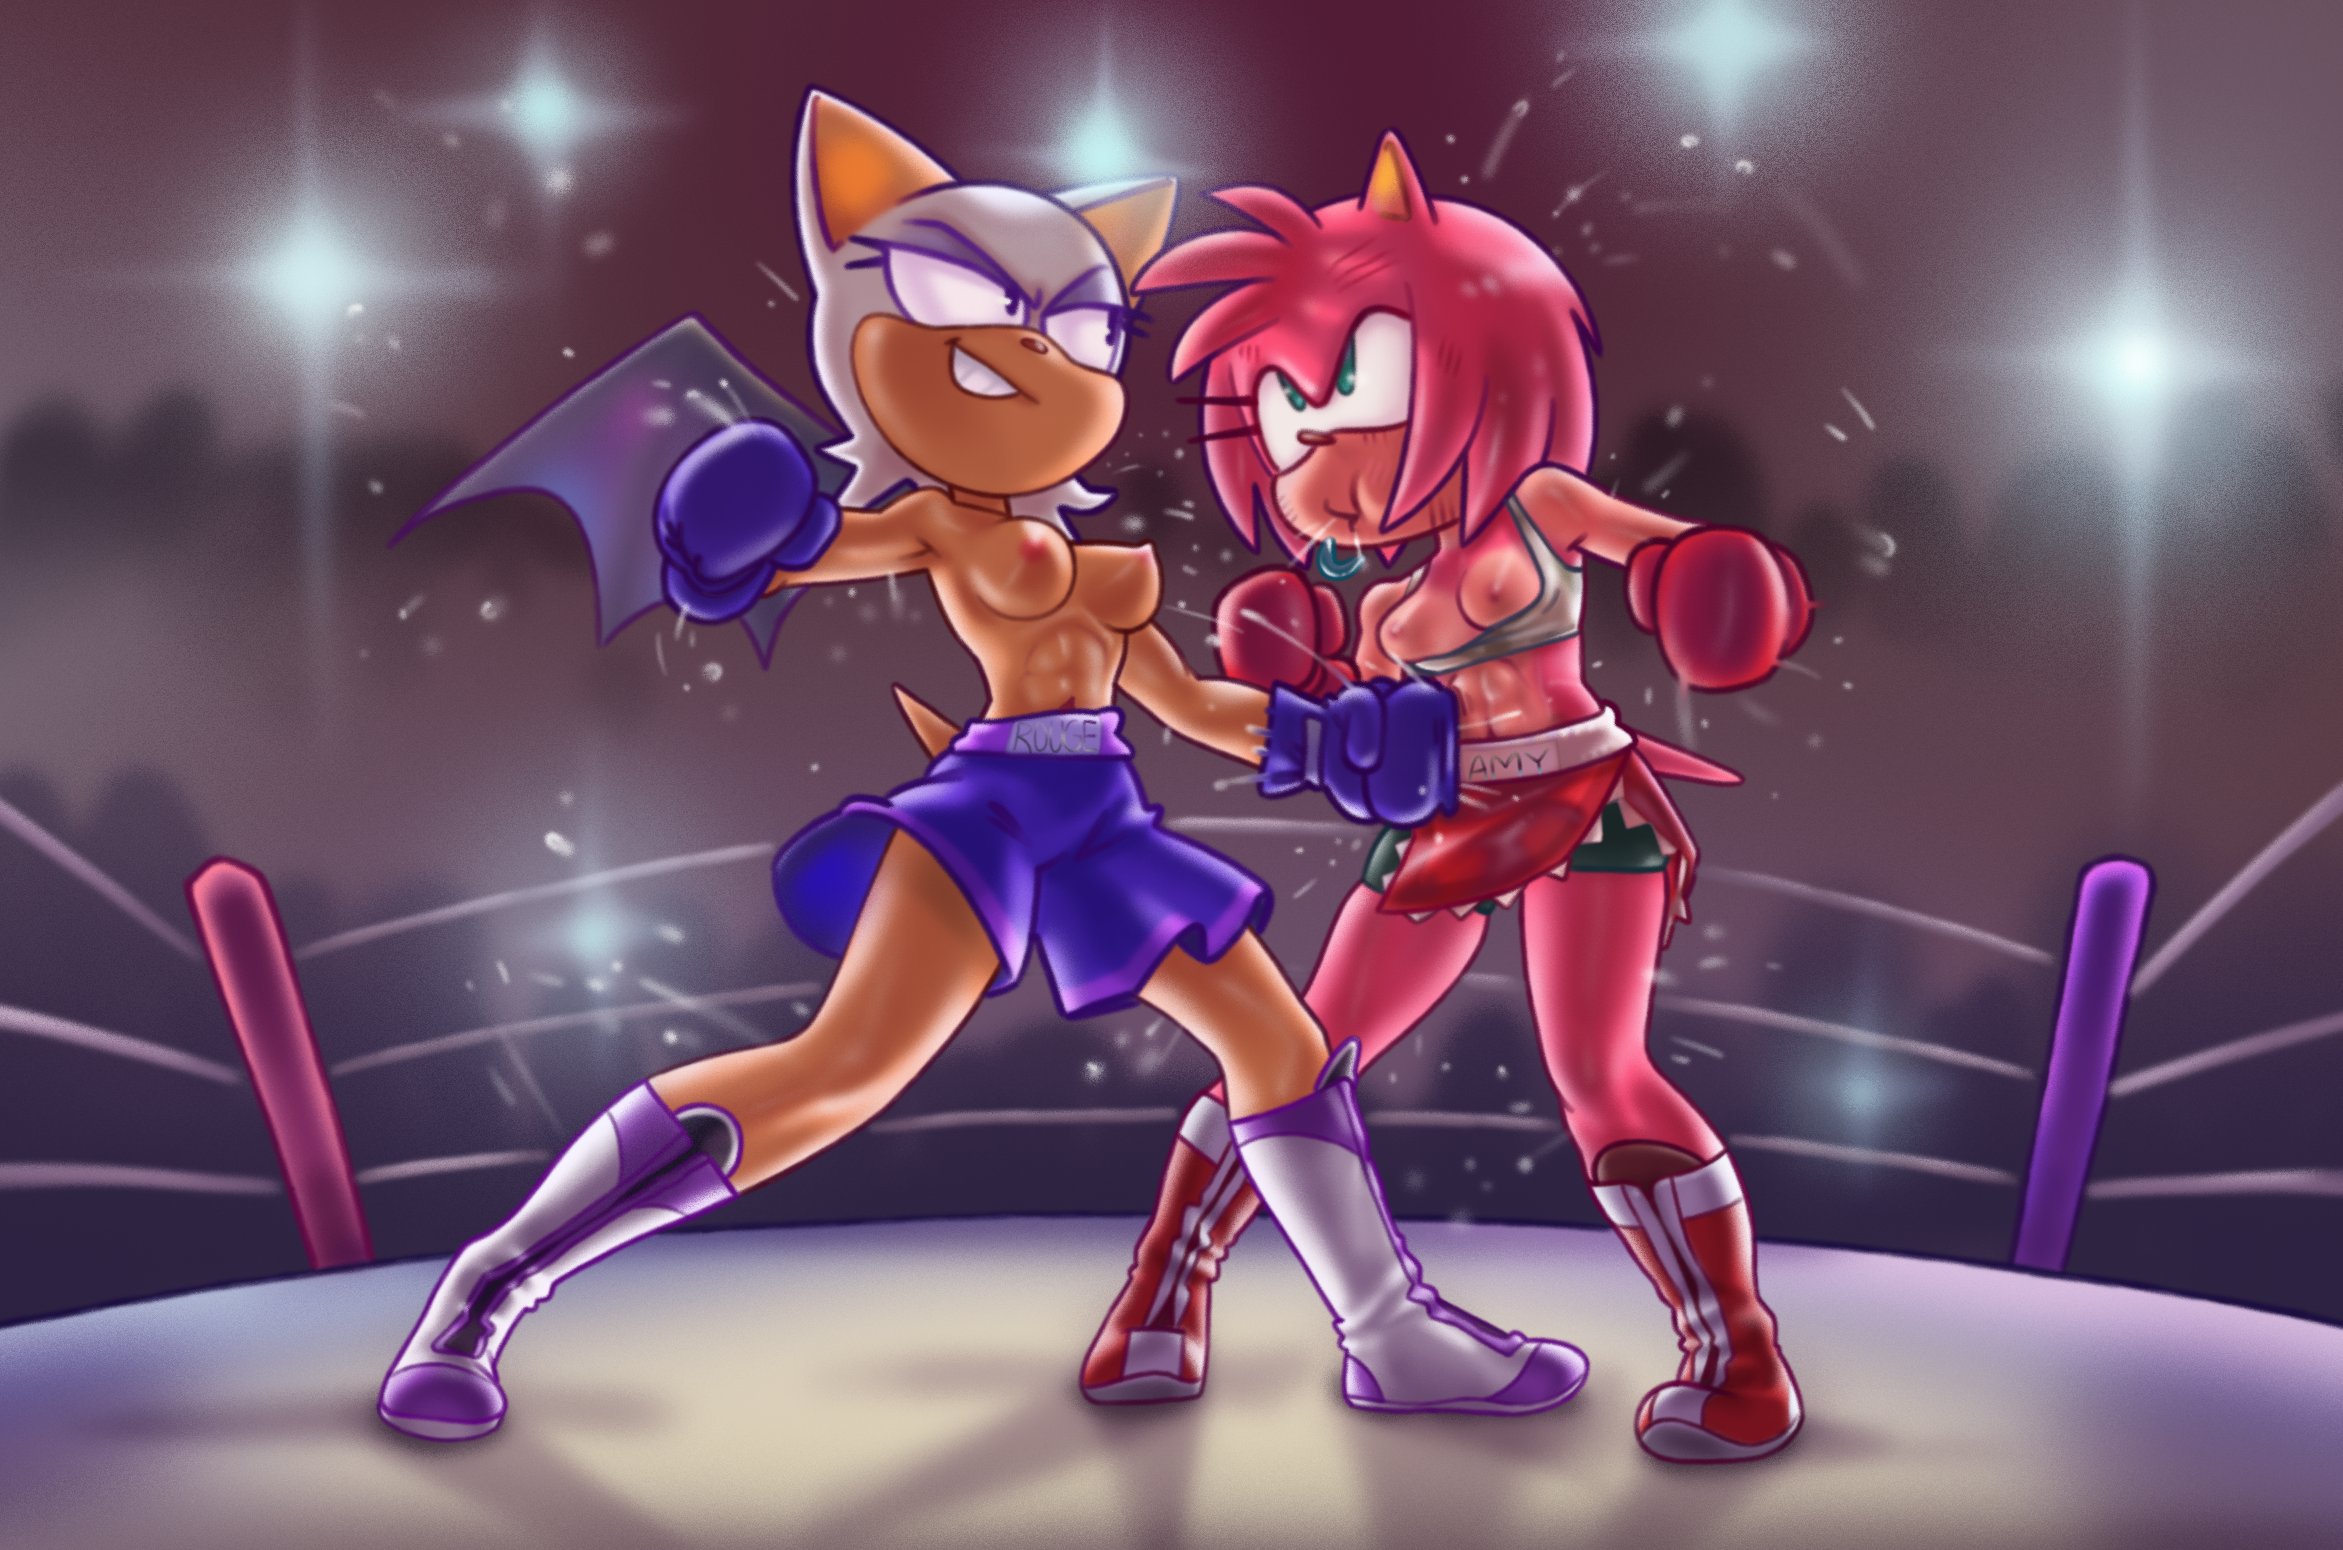 Amy rose boxing